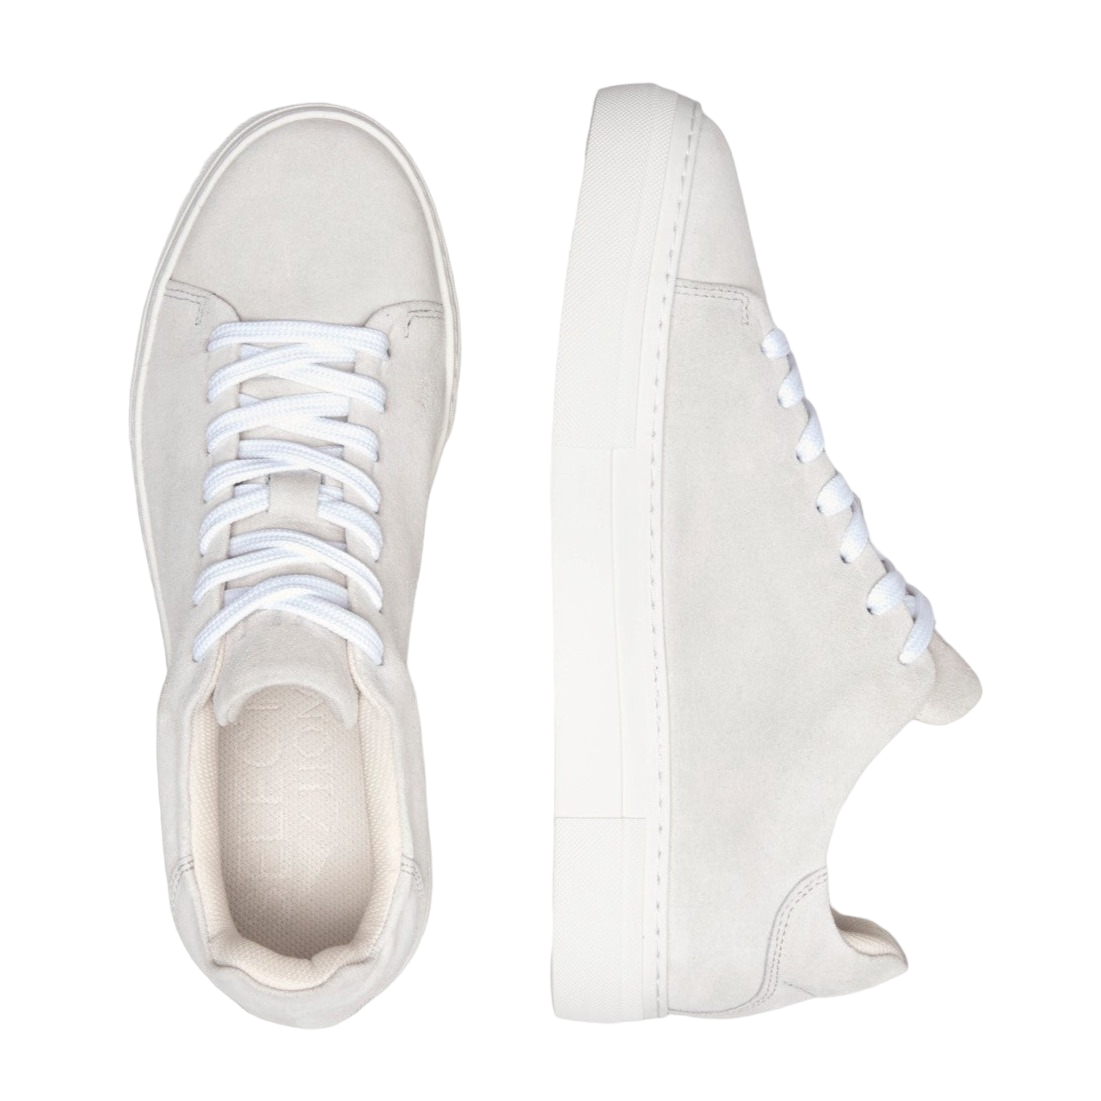 David Chunky Suede Trainer - White